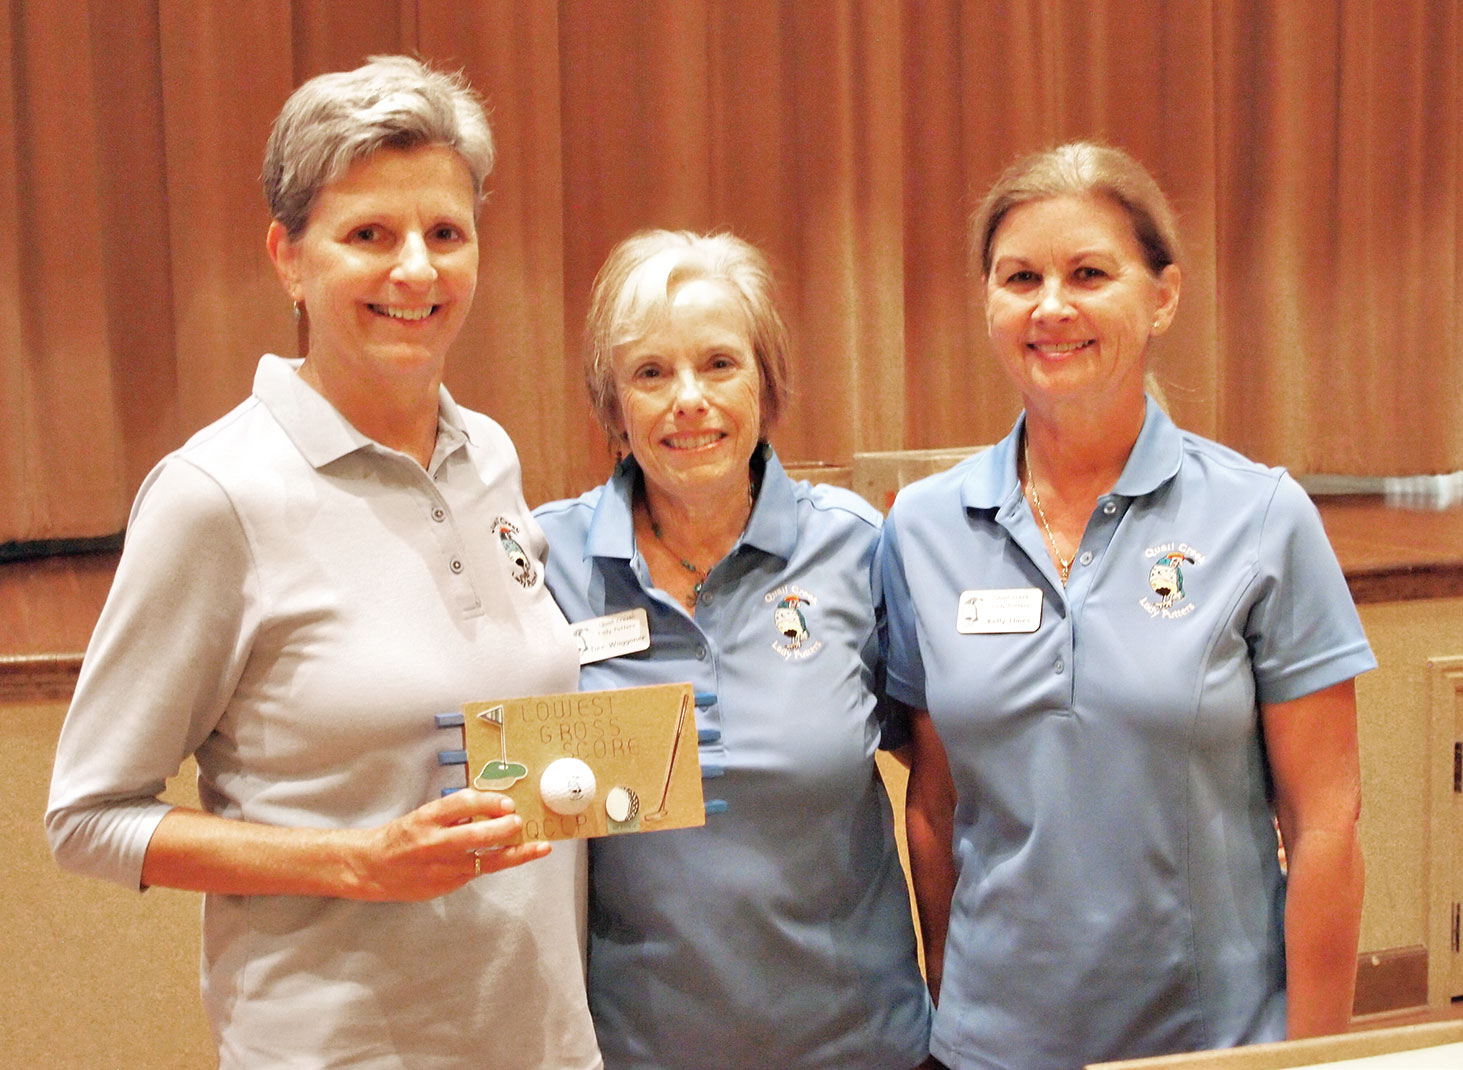 Left to right: Former Putters President Dee Waggoner and Vice President Kelly Hines present the Crystal Golf Ball to Mary Anderson for getting the most holes-in-one; photo by Sylvia Butler.